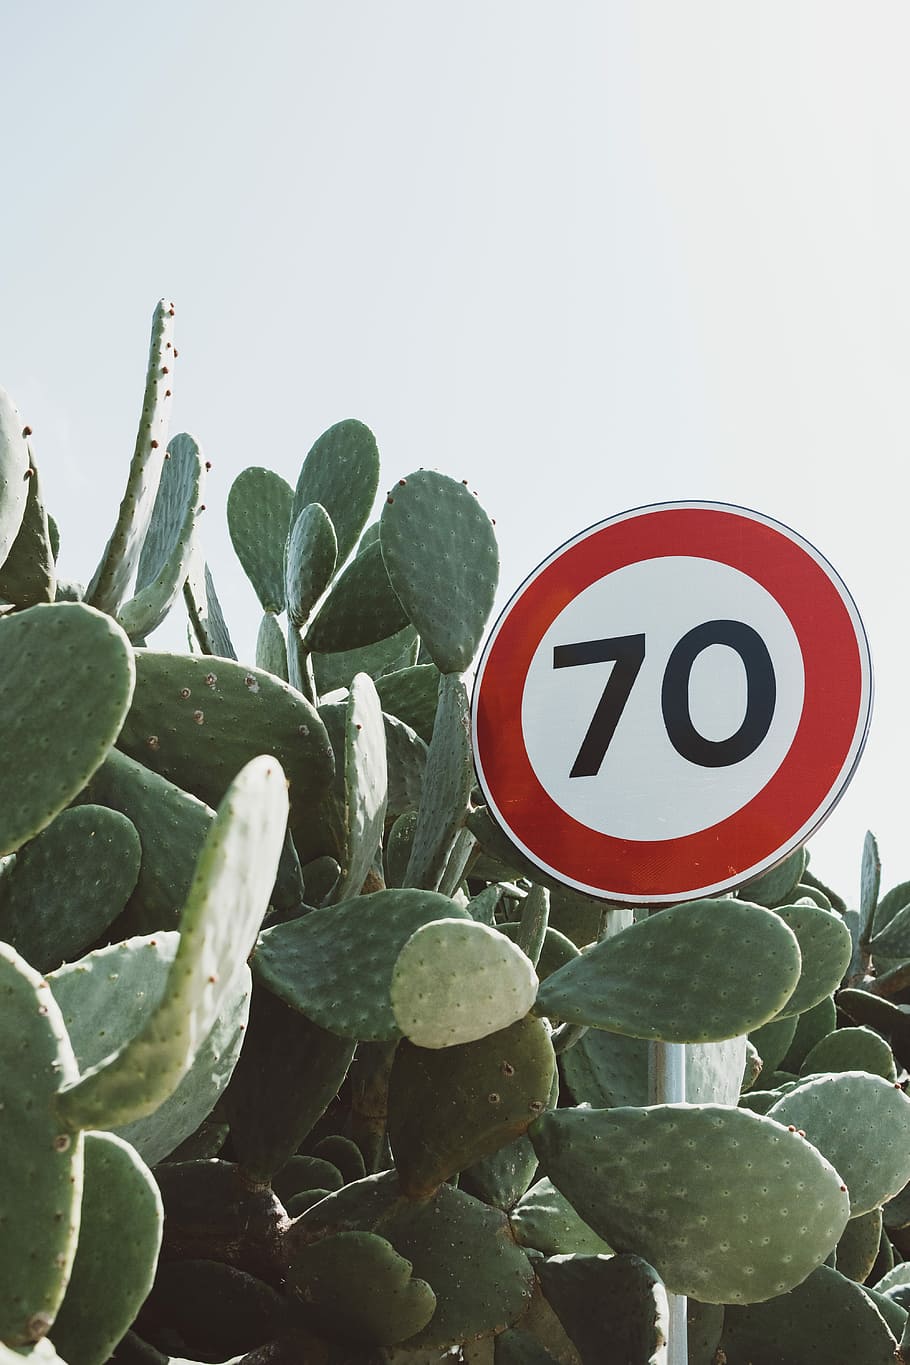 70 road sign surrounded by bunny ear cactus plant, signage beside cactus, HD wallpaper